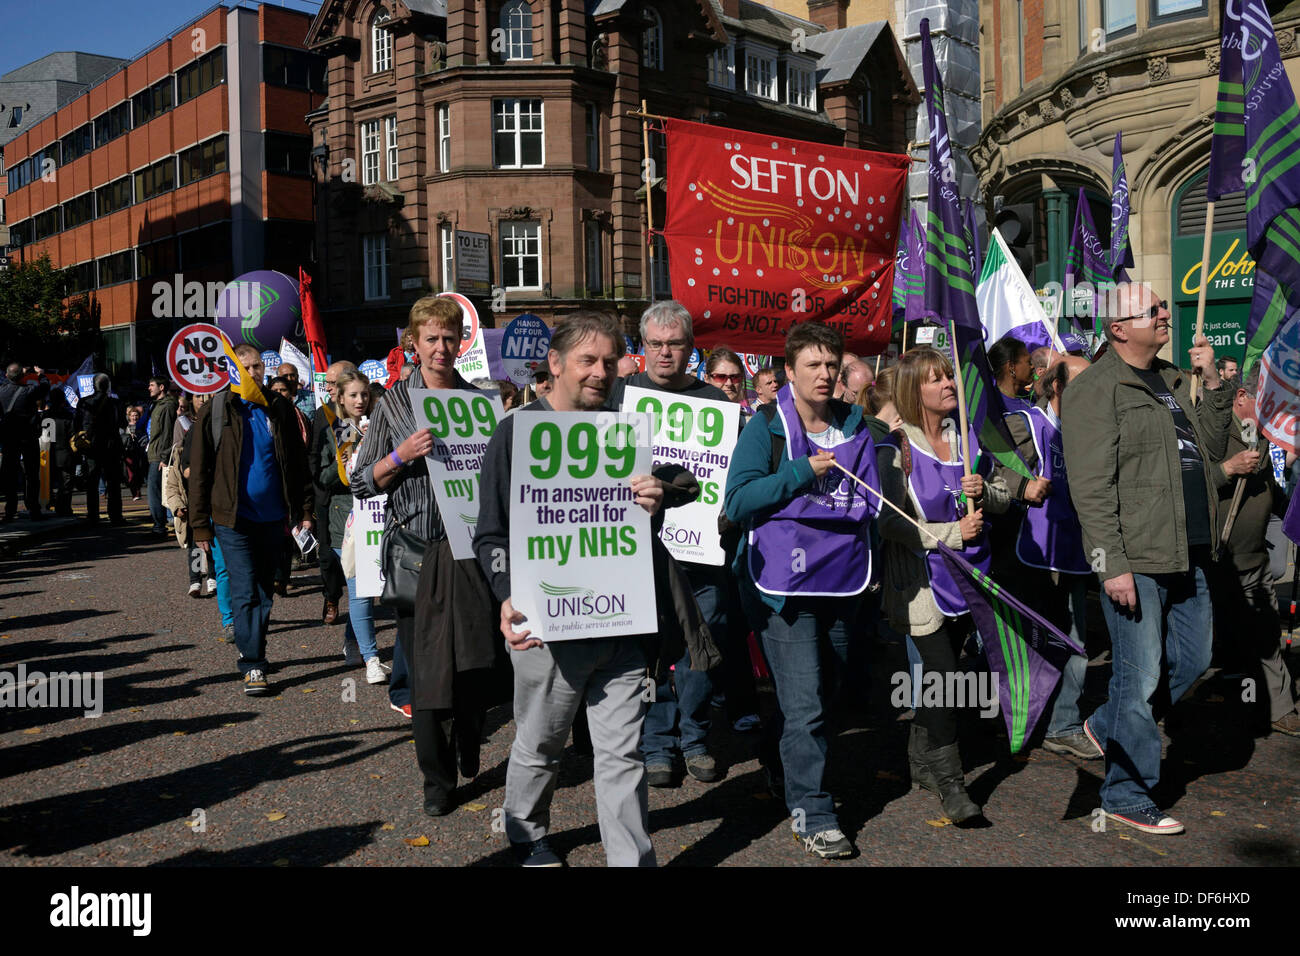 Supporters of the NHS and UNISON are among the tens of thousands of protesters at the TUC demonstration against the Coalition Government's policy on the NHS, jobs and austerity. The protest coincides with the first day of the Conservative Party Conference in Manchester. TUC Protest  Manchester, UK  29 September 2013 Stock Photo